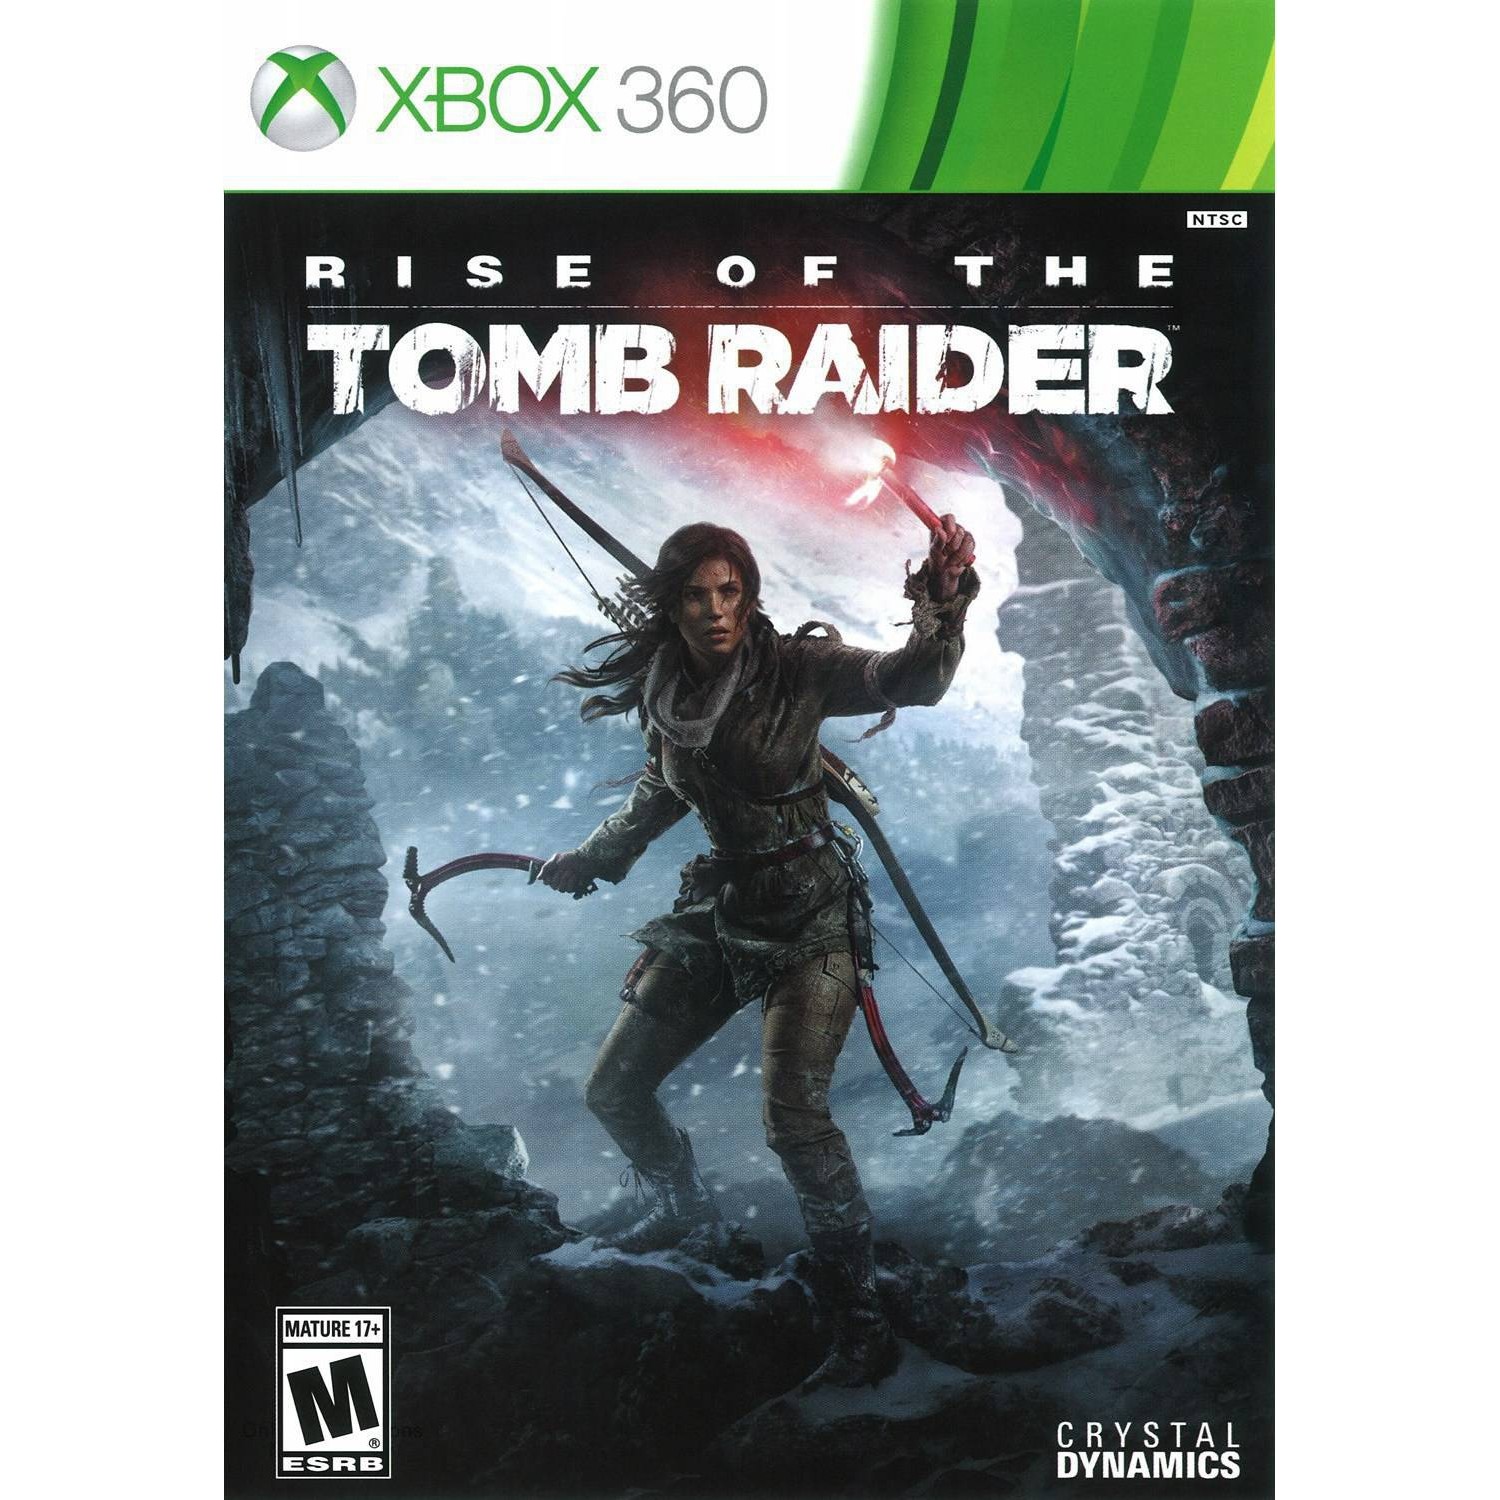 rise of the tomb raider xbox 360 download free